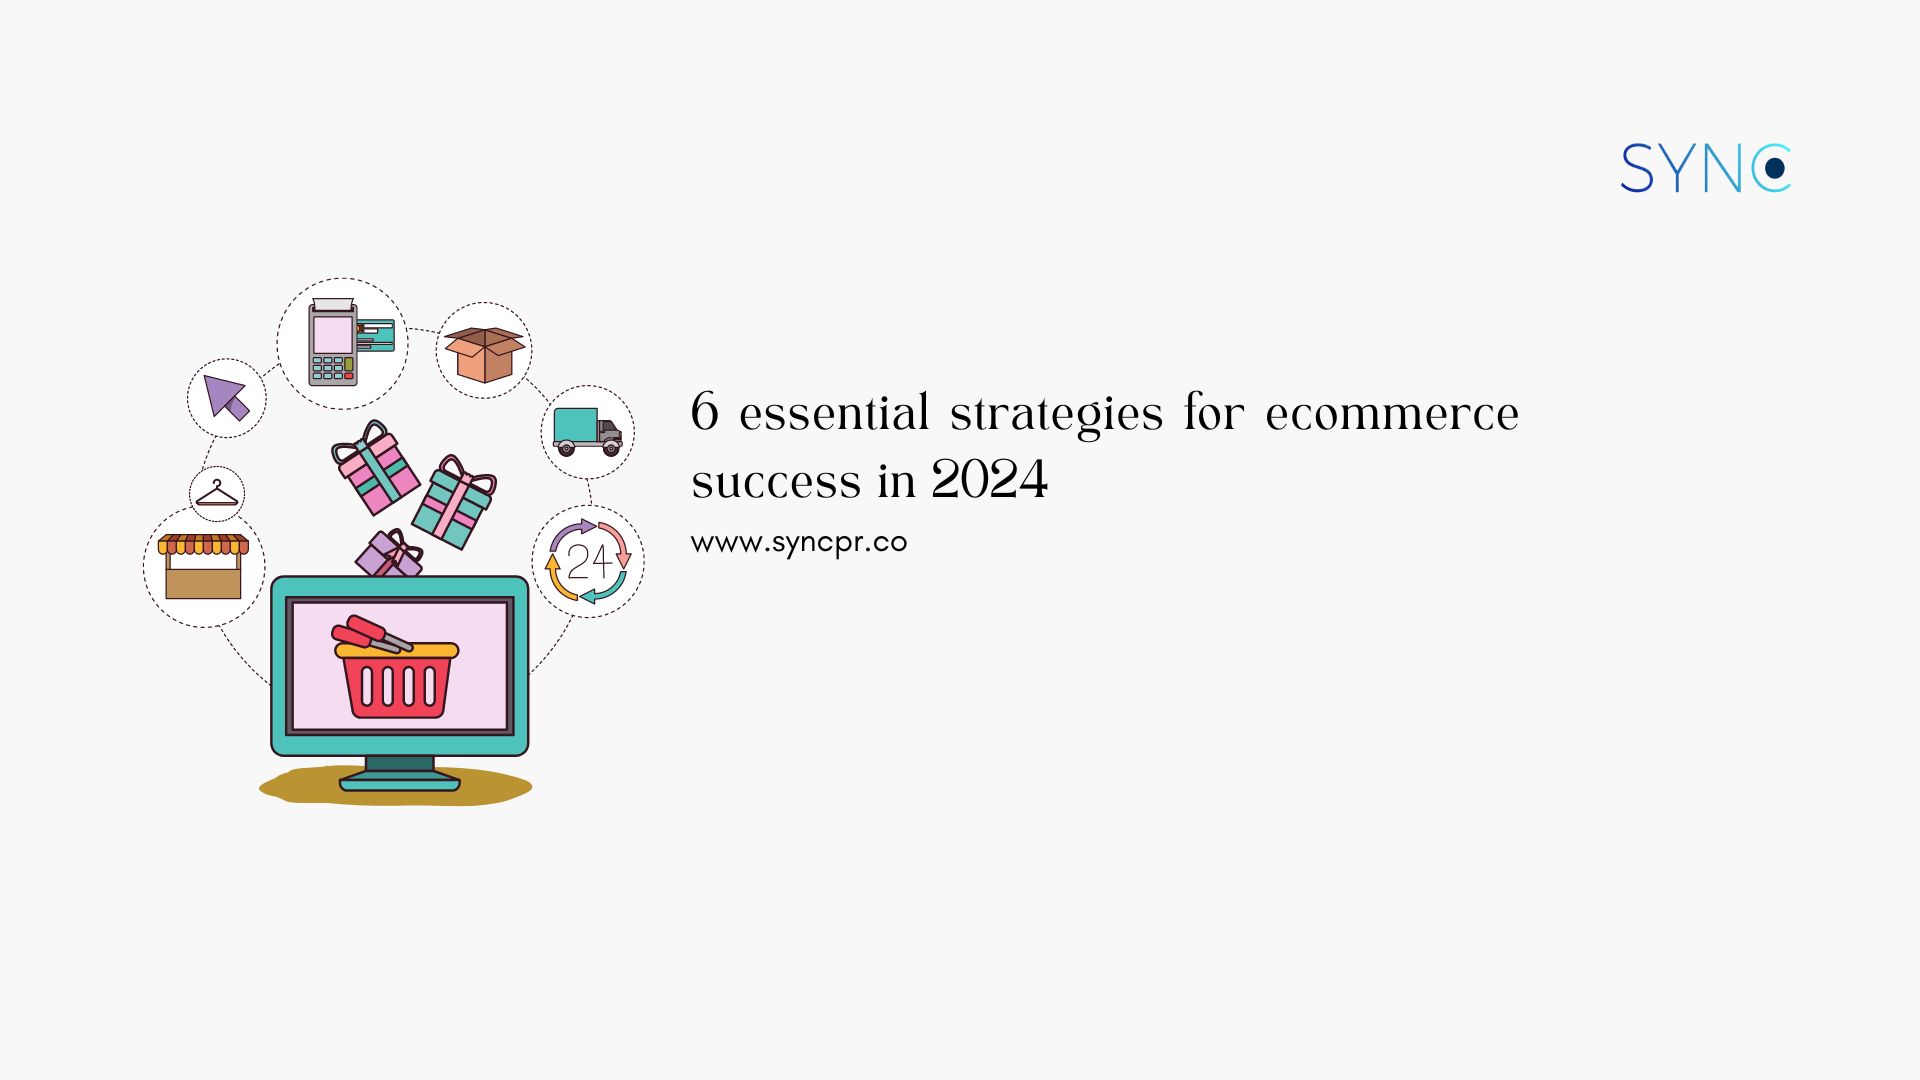 6 essential strategies for ecommerce success in 2024